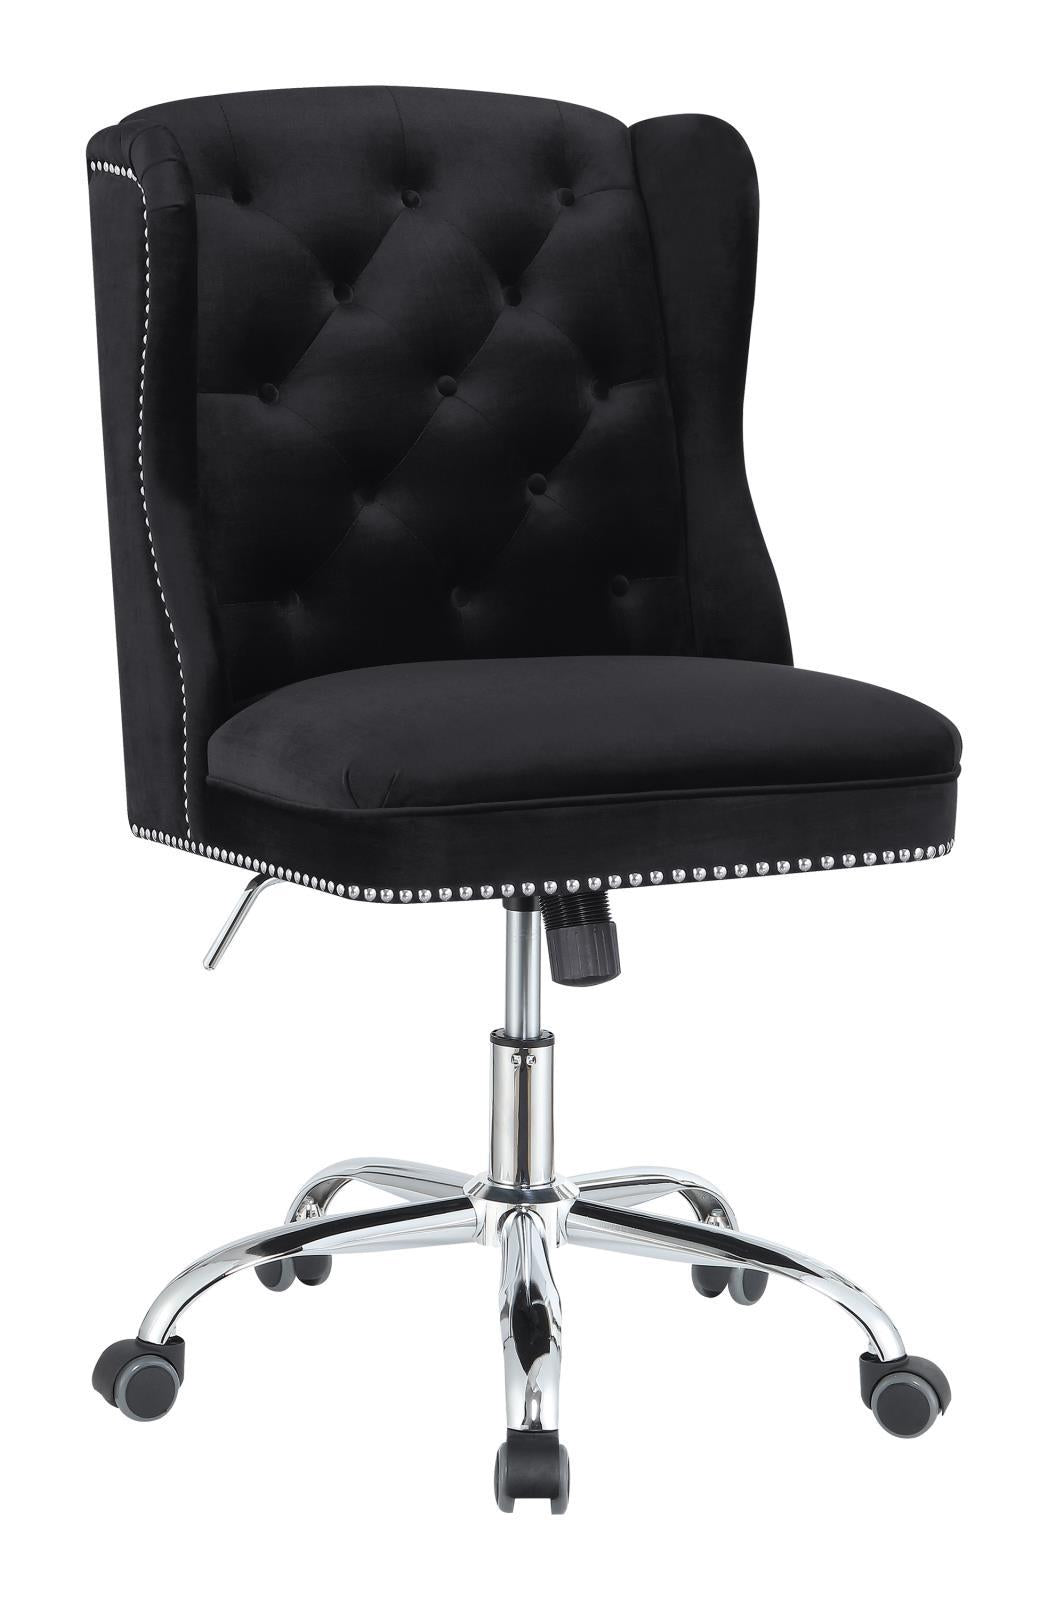 Julius Upholstered Tufted Office Chair Black and Chrome - Half Price Furniture